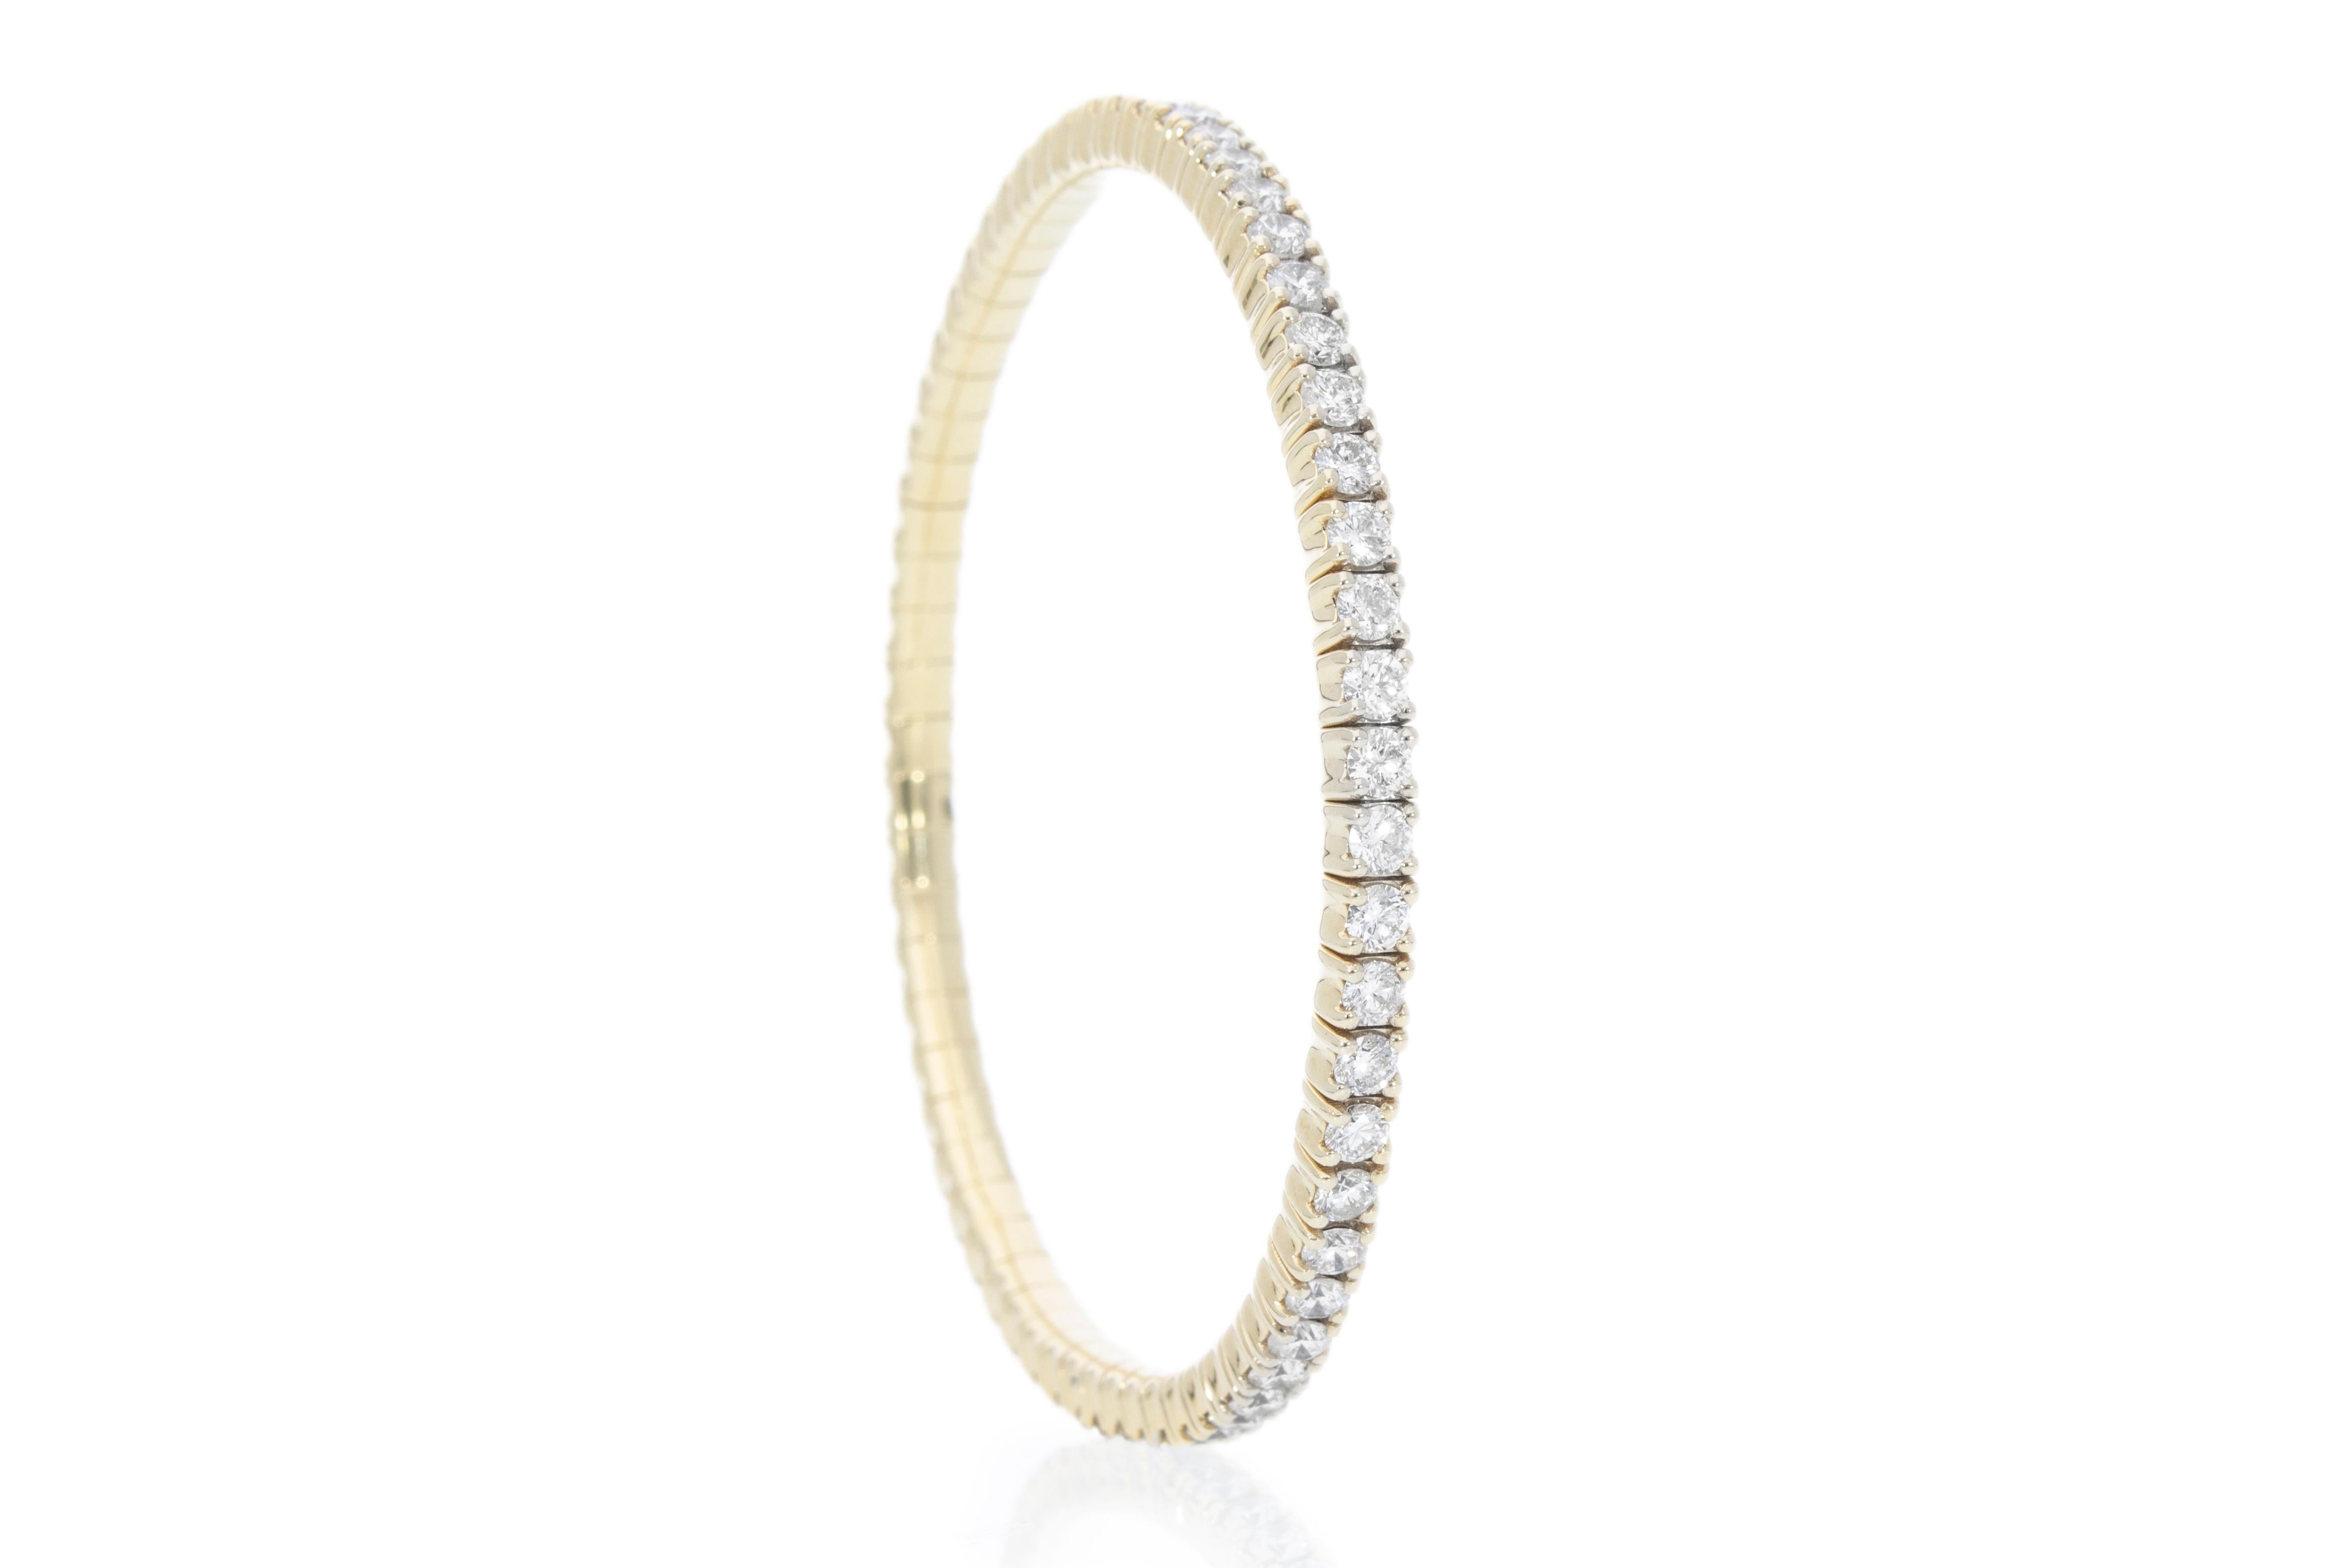 Elastic tennis bracelet with 64 diamonds for a total weight of ct 4.30.
The bracelet has no closure as it is elastic.
The bracelet is in 18 Kt yellow gold. 
Total weight: 16.3 grams
Total carat: ct 4.30
Number of diamonds: 64
The bracelet is